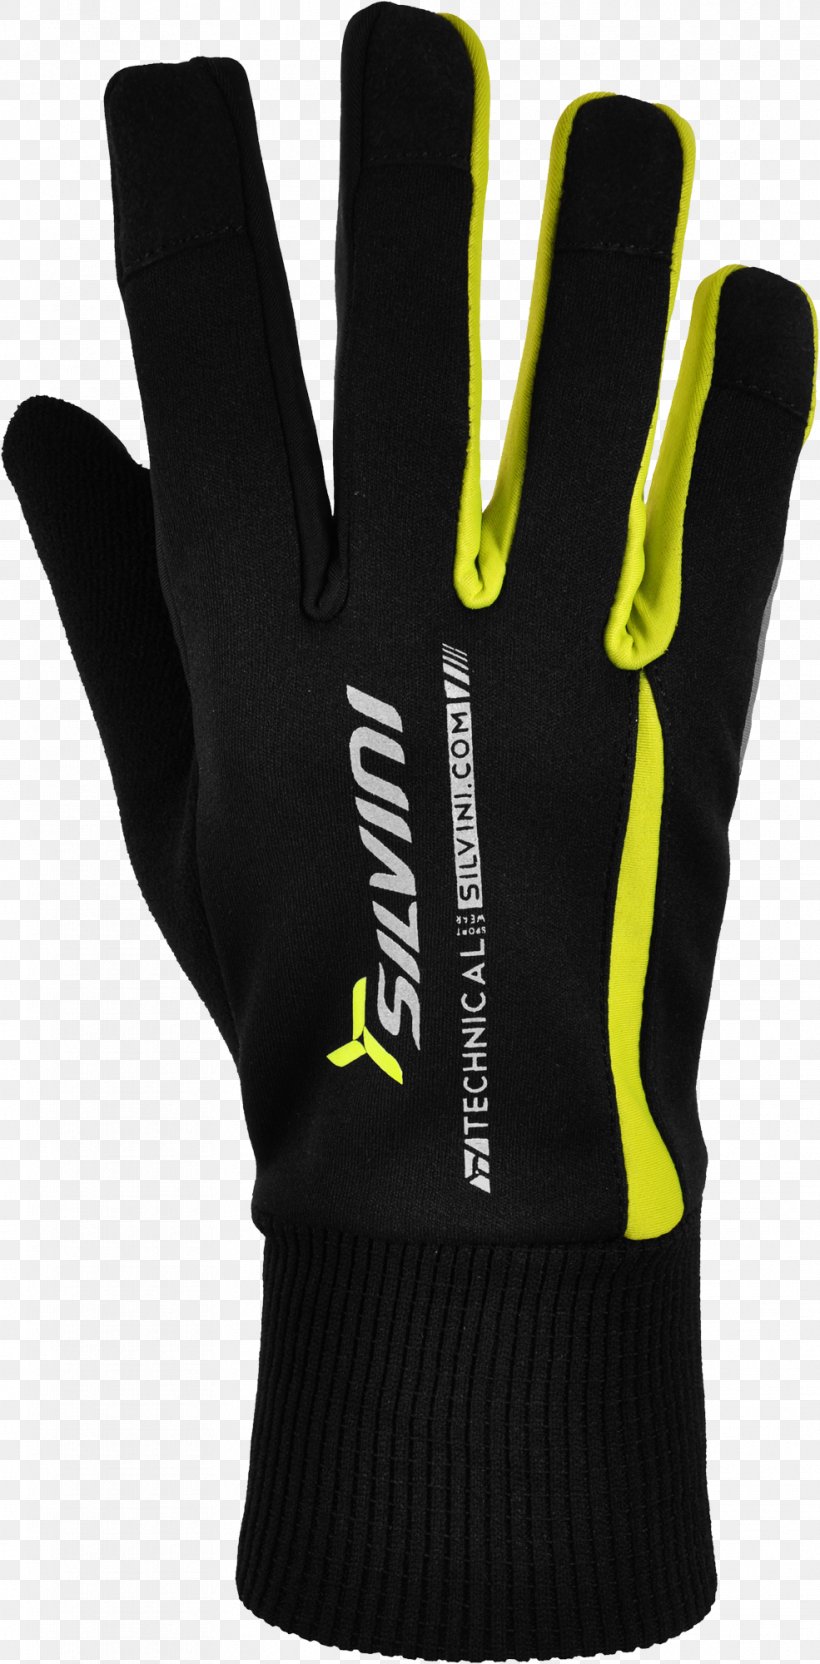 Cycling Glove Black Neon Tetra, PNG, 985x2000px, Glove, Bicycle Glove, Cycling Glove, Football, Goalkeeper Download Free